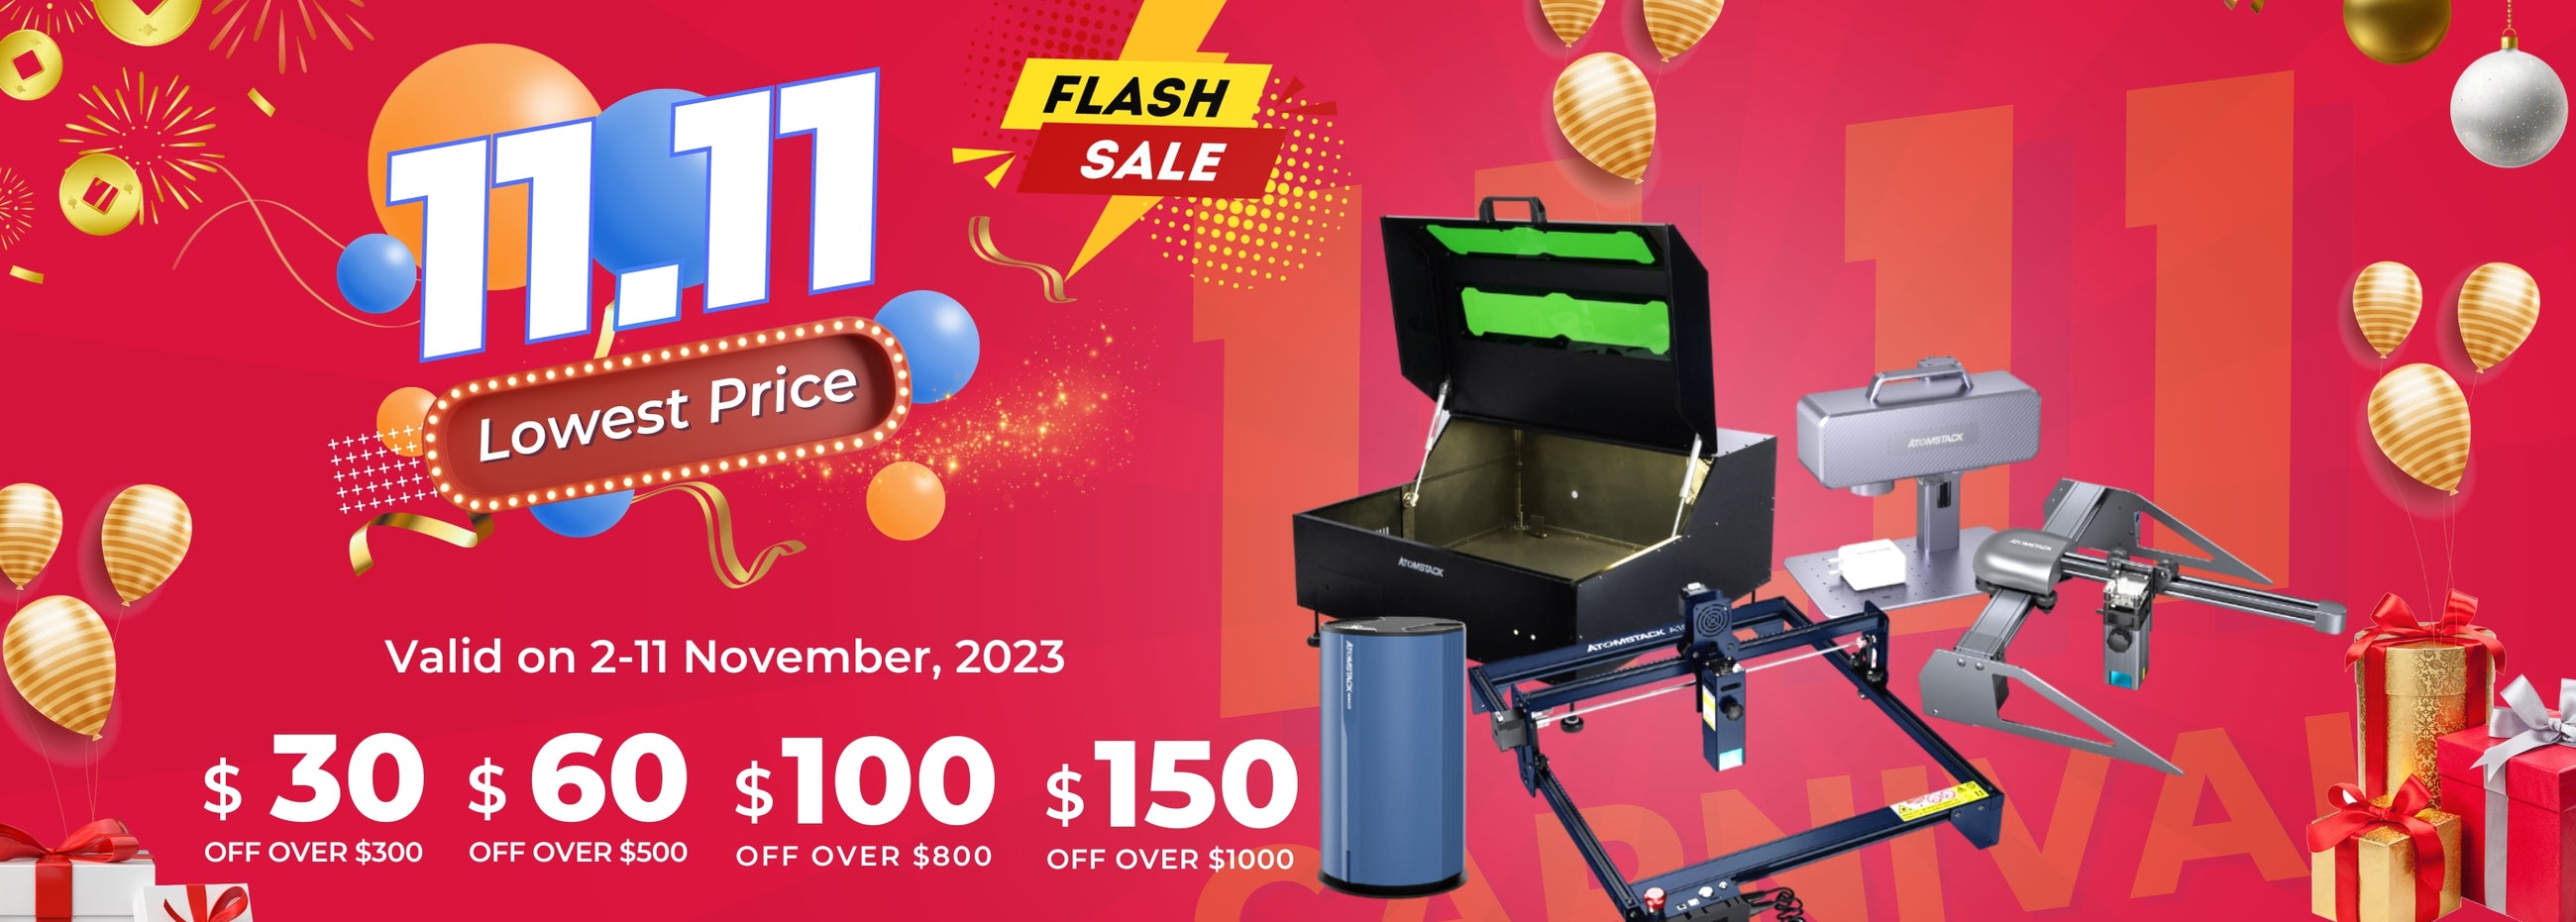 11.11 flash sale, lowest price, up to $150 off. Buy more save more!